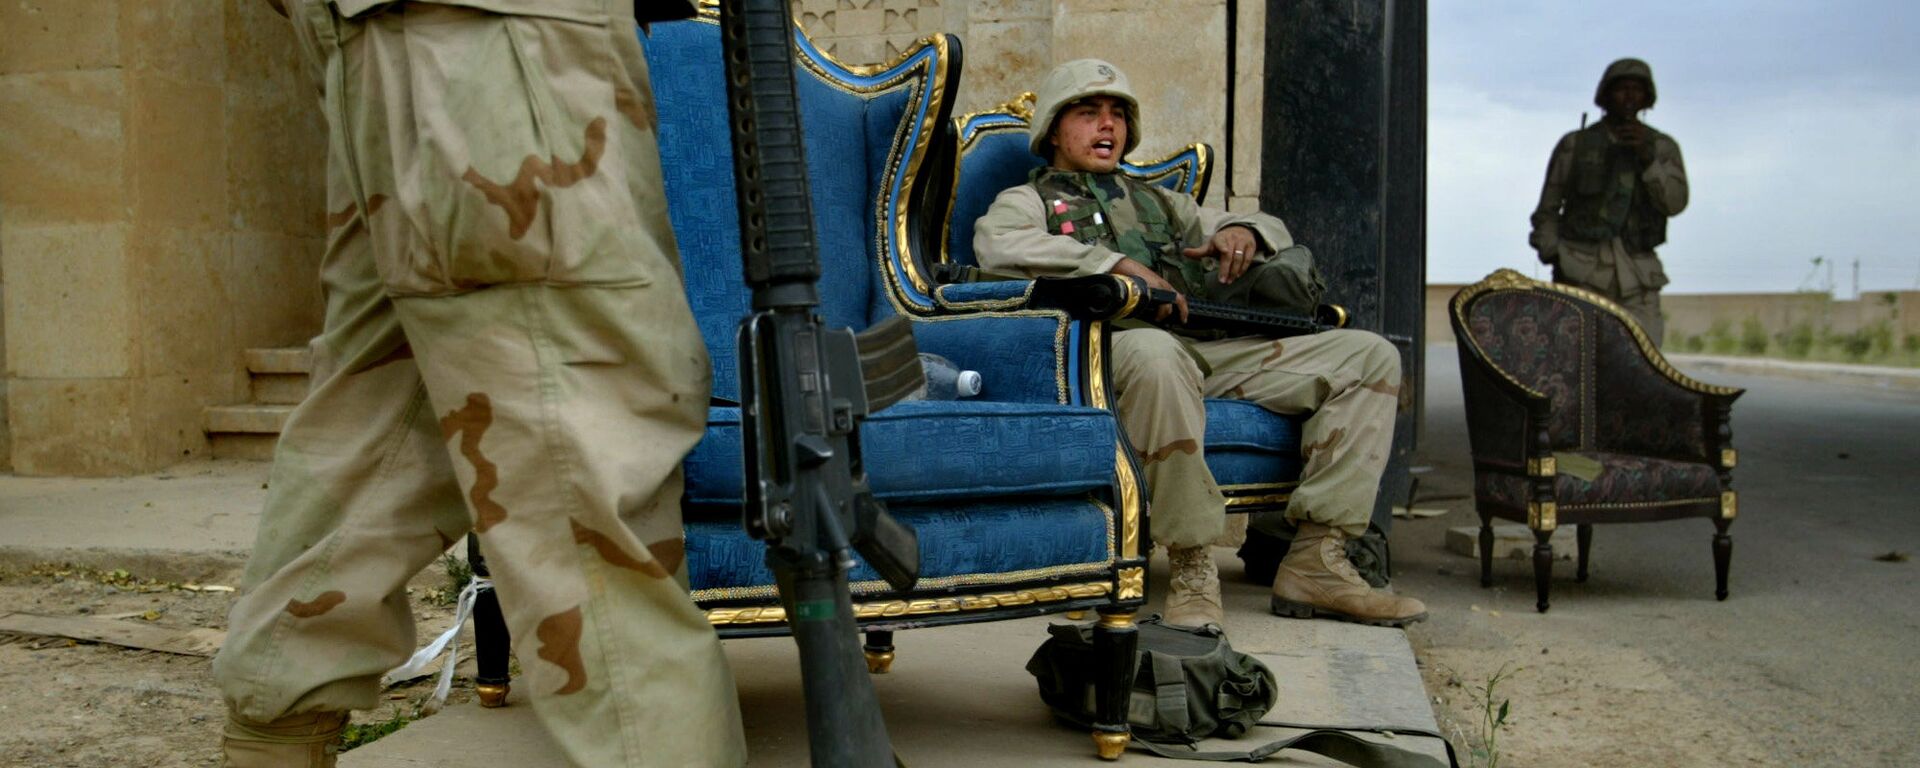 U.S. Marines, using luxurious armchairs, man one of the entrances to Saddam Hussein's presidential palace compound in the northern Iraqi town of Tikrit, Tuesday April 15, 2003 - Sputnik International, 1920, 12.05.2017